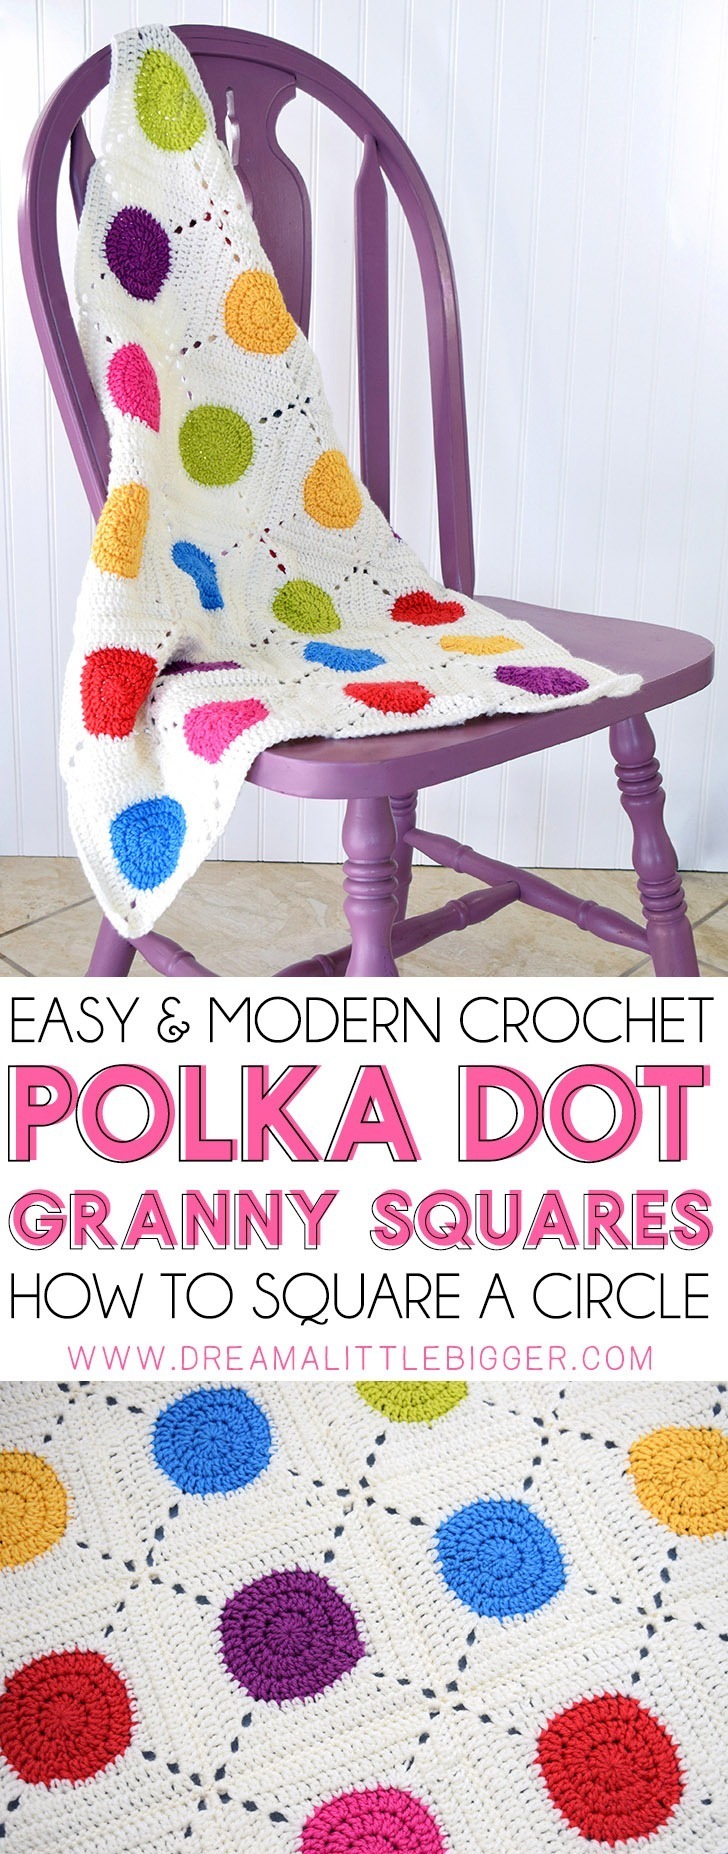 I love modern crochet patterns! This take with a colorful circle encased in white is modern and so fun. Who knew a circle granny square could look so cool!